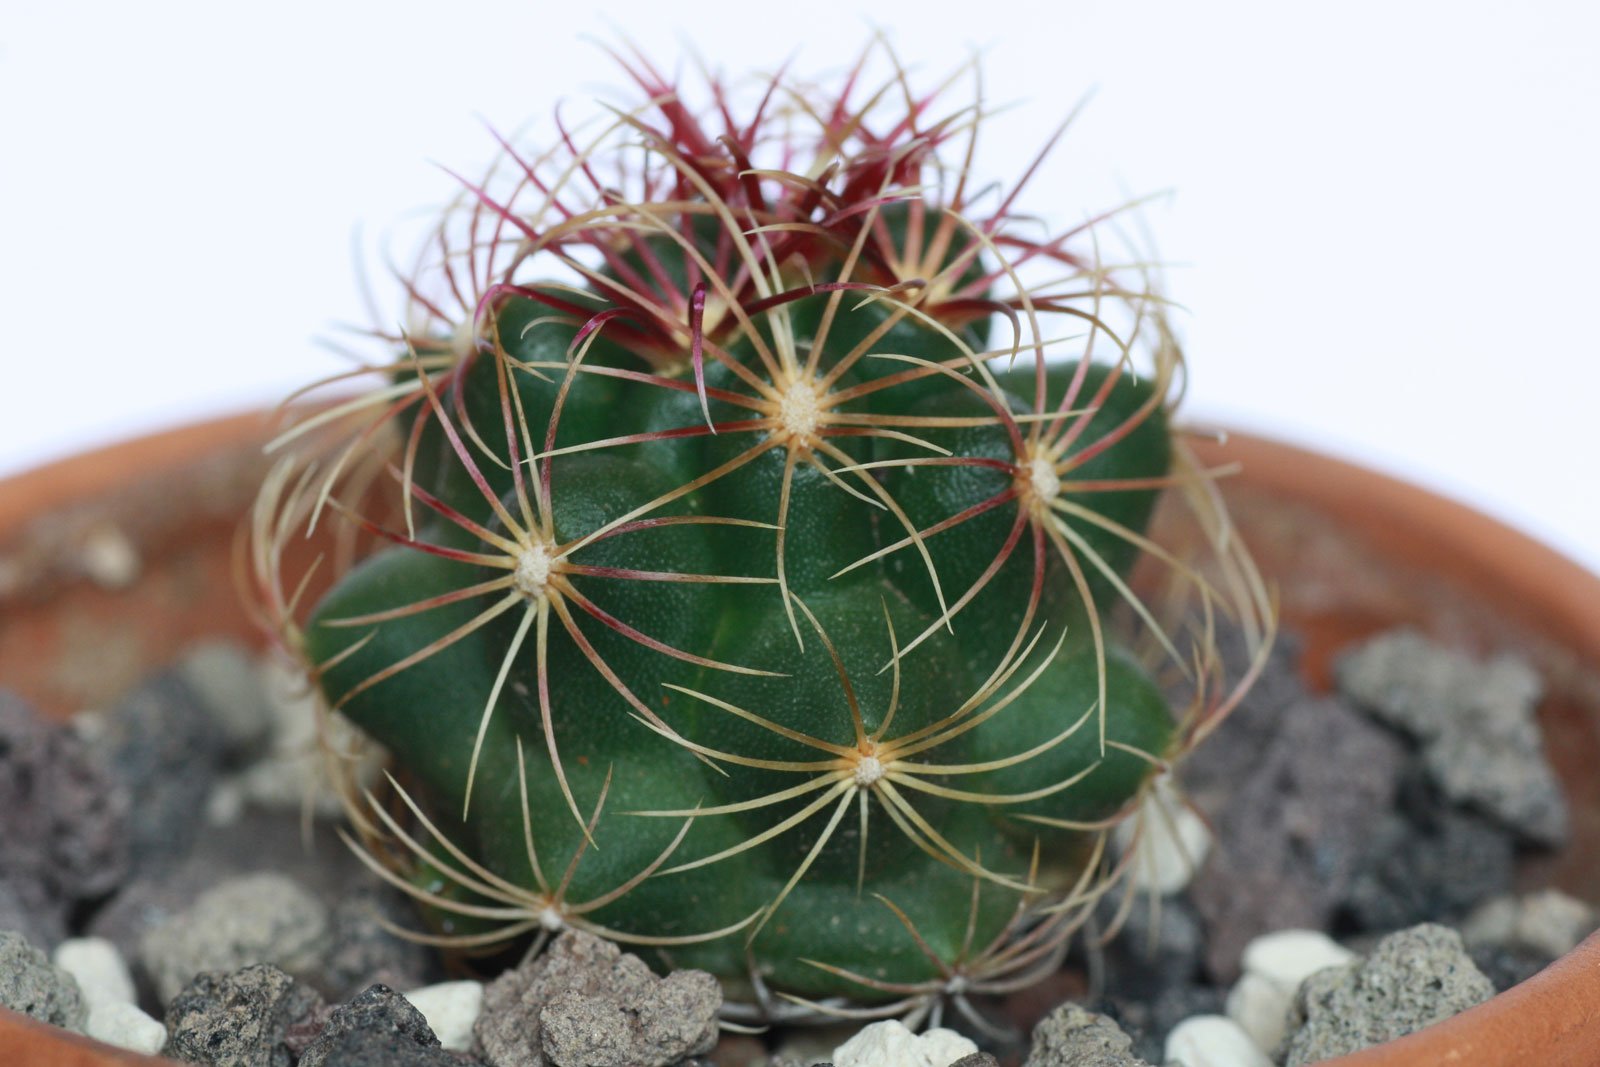 Pink Thelocactus Bicolor Cactus Glory of Texas Seeds